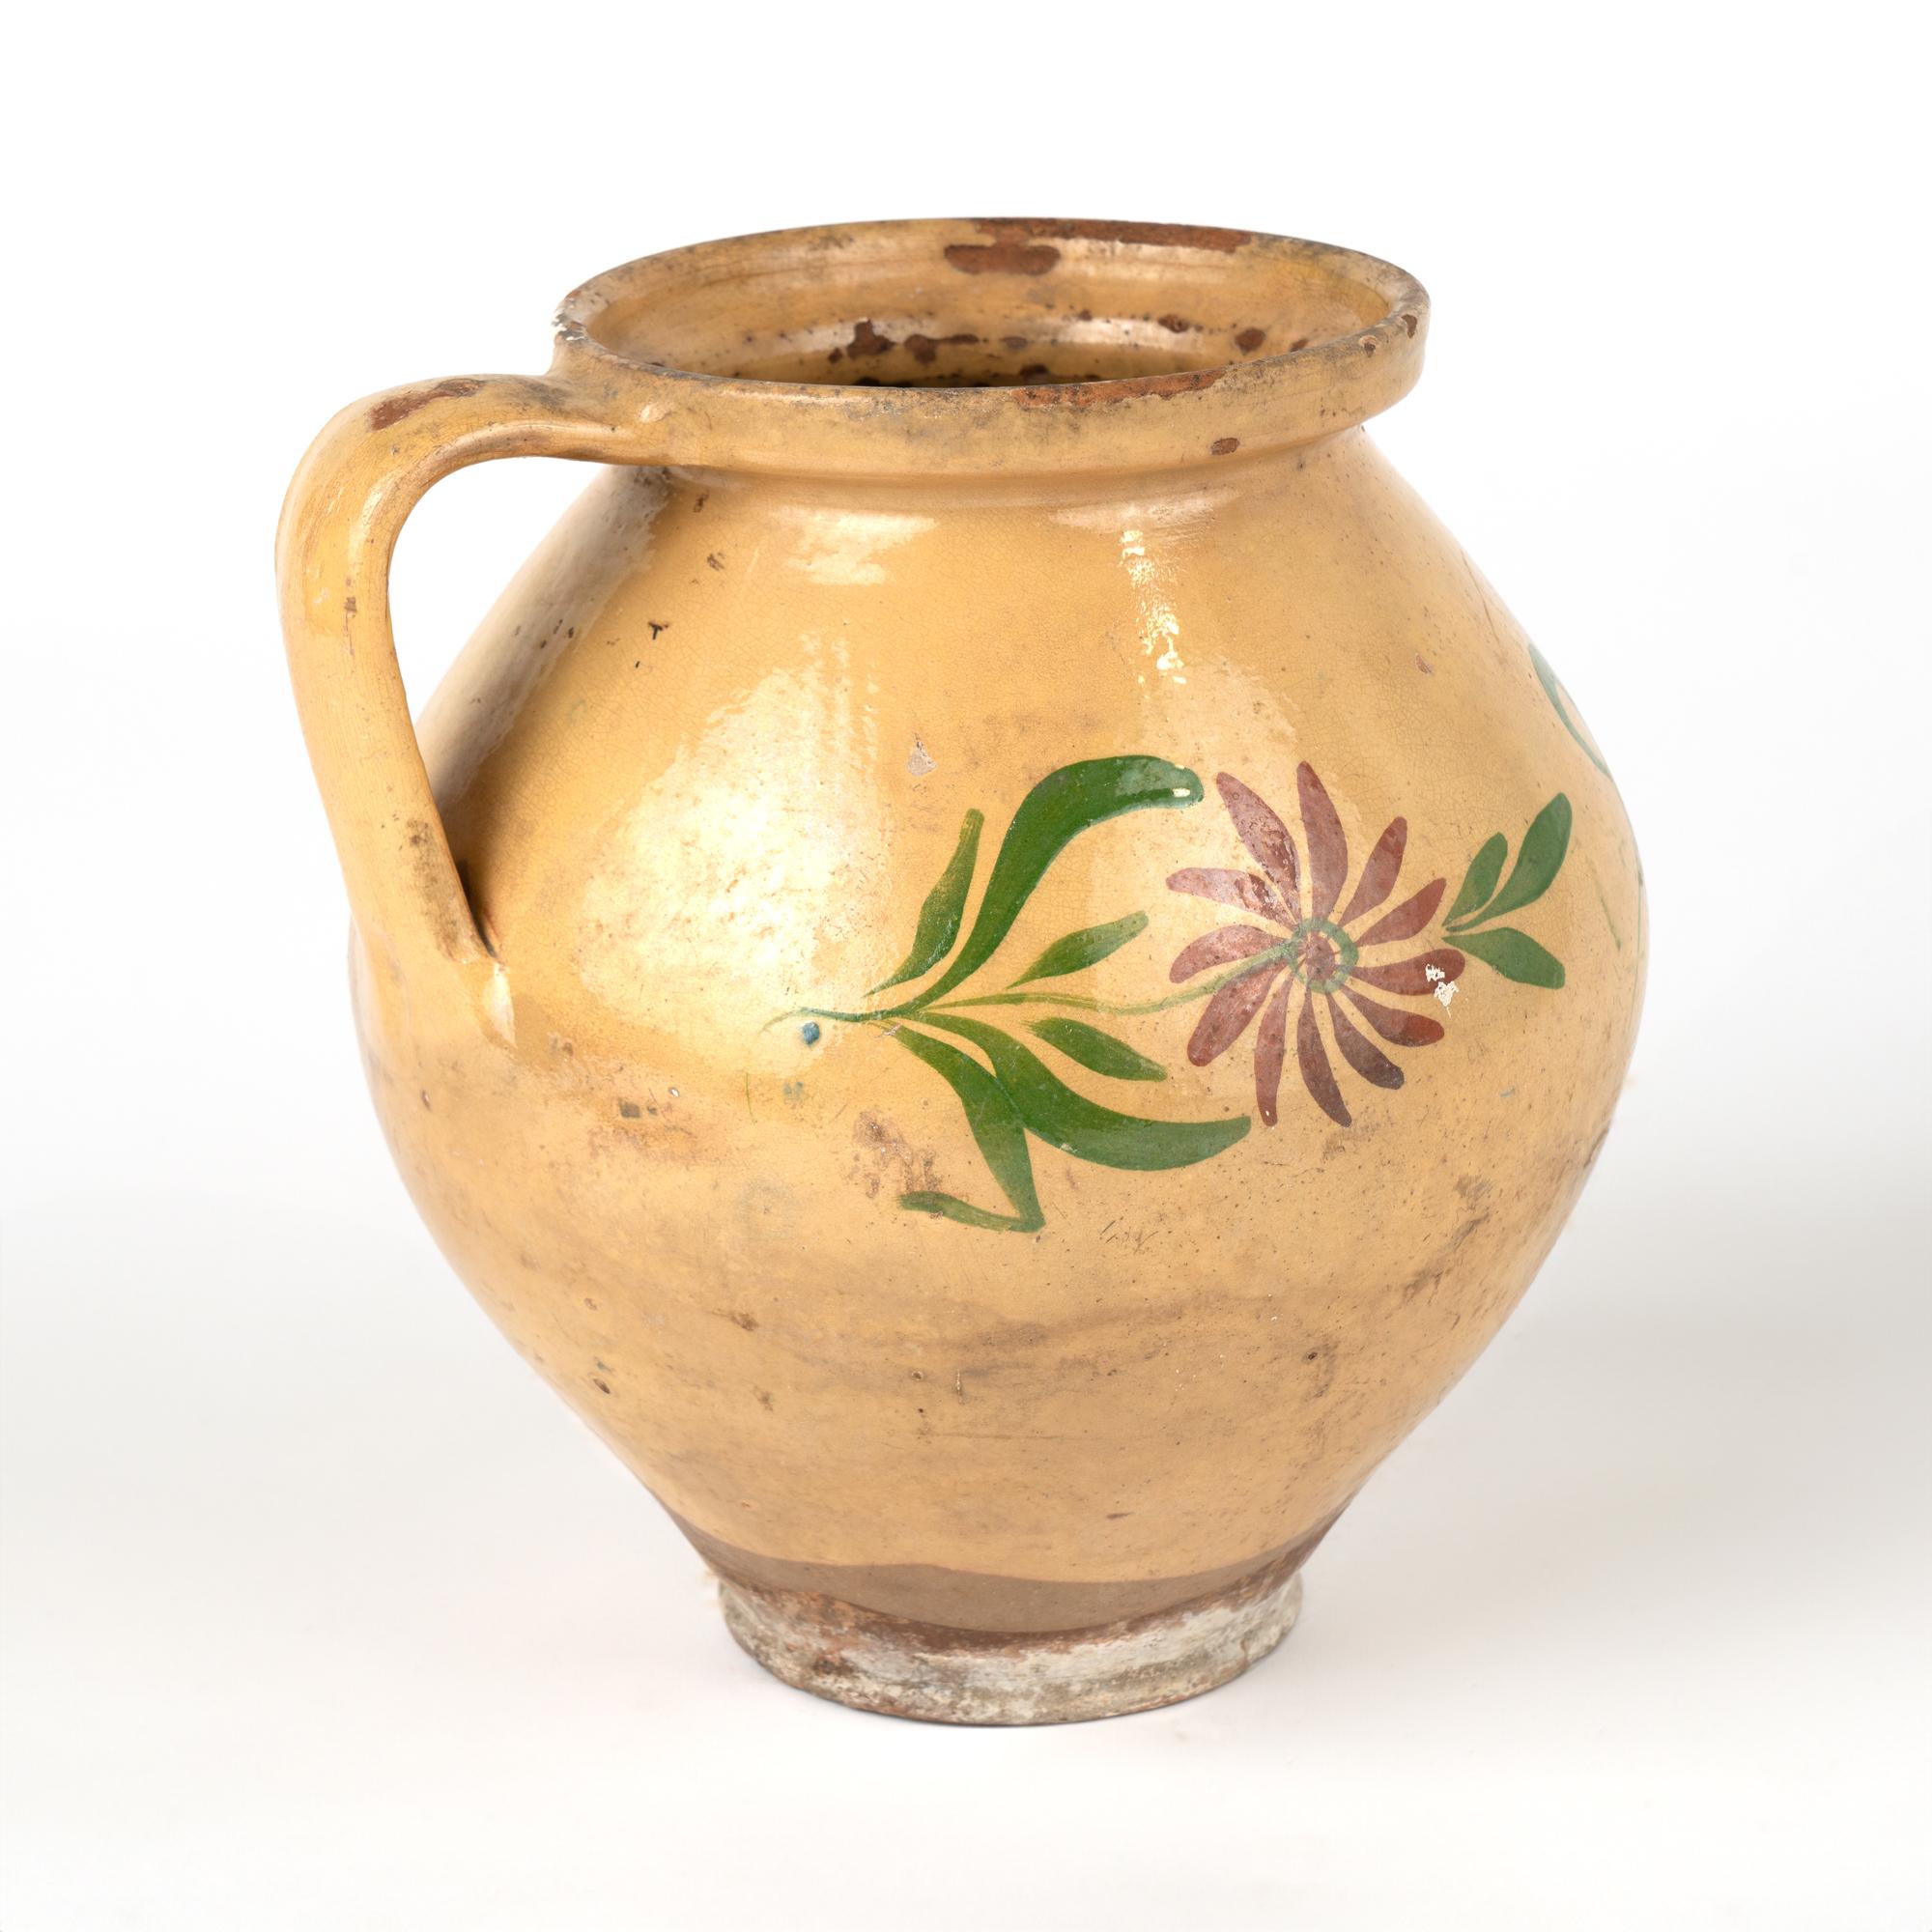 Original hand painted earthenware pottery with handle. Light ochre background with floral and leaf design.
Sold in original vintage used condition. Any chips, cracks, distress to paint or pottery is reflective of age and use. Solid condition.

With